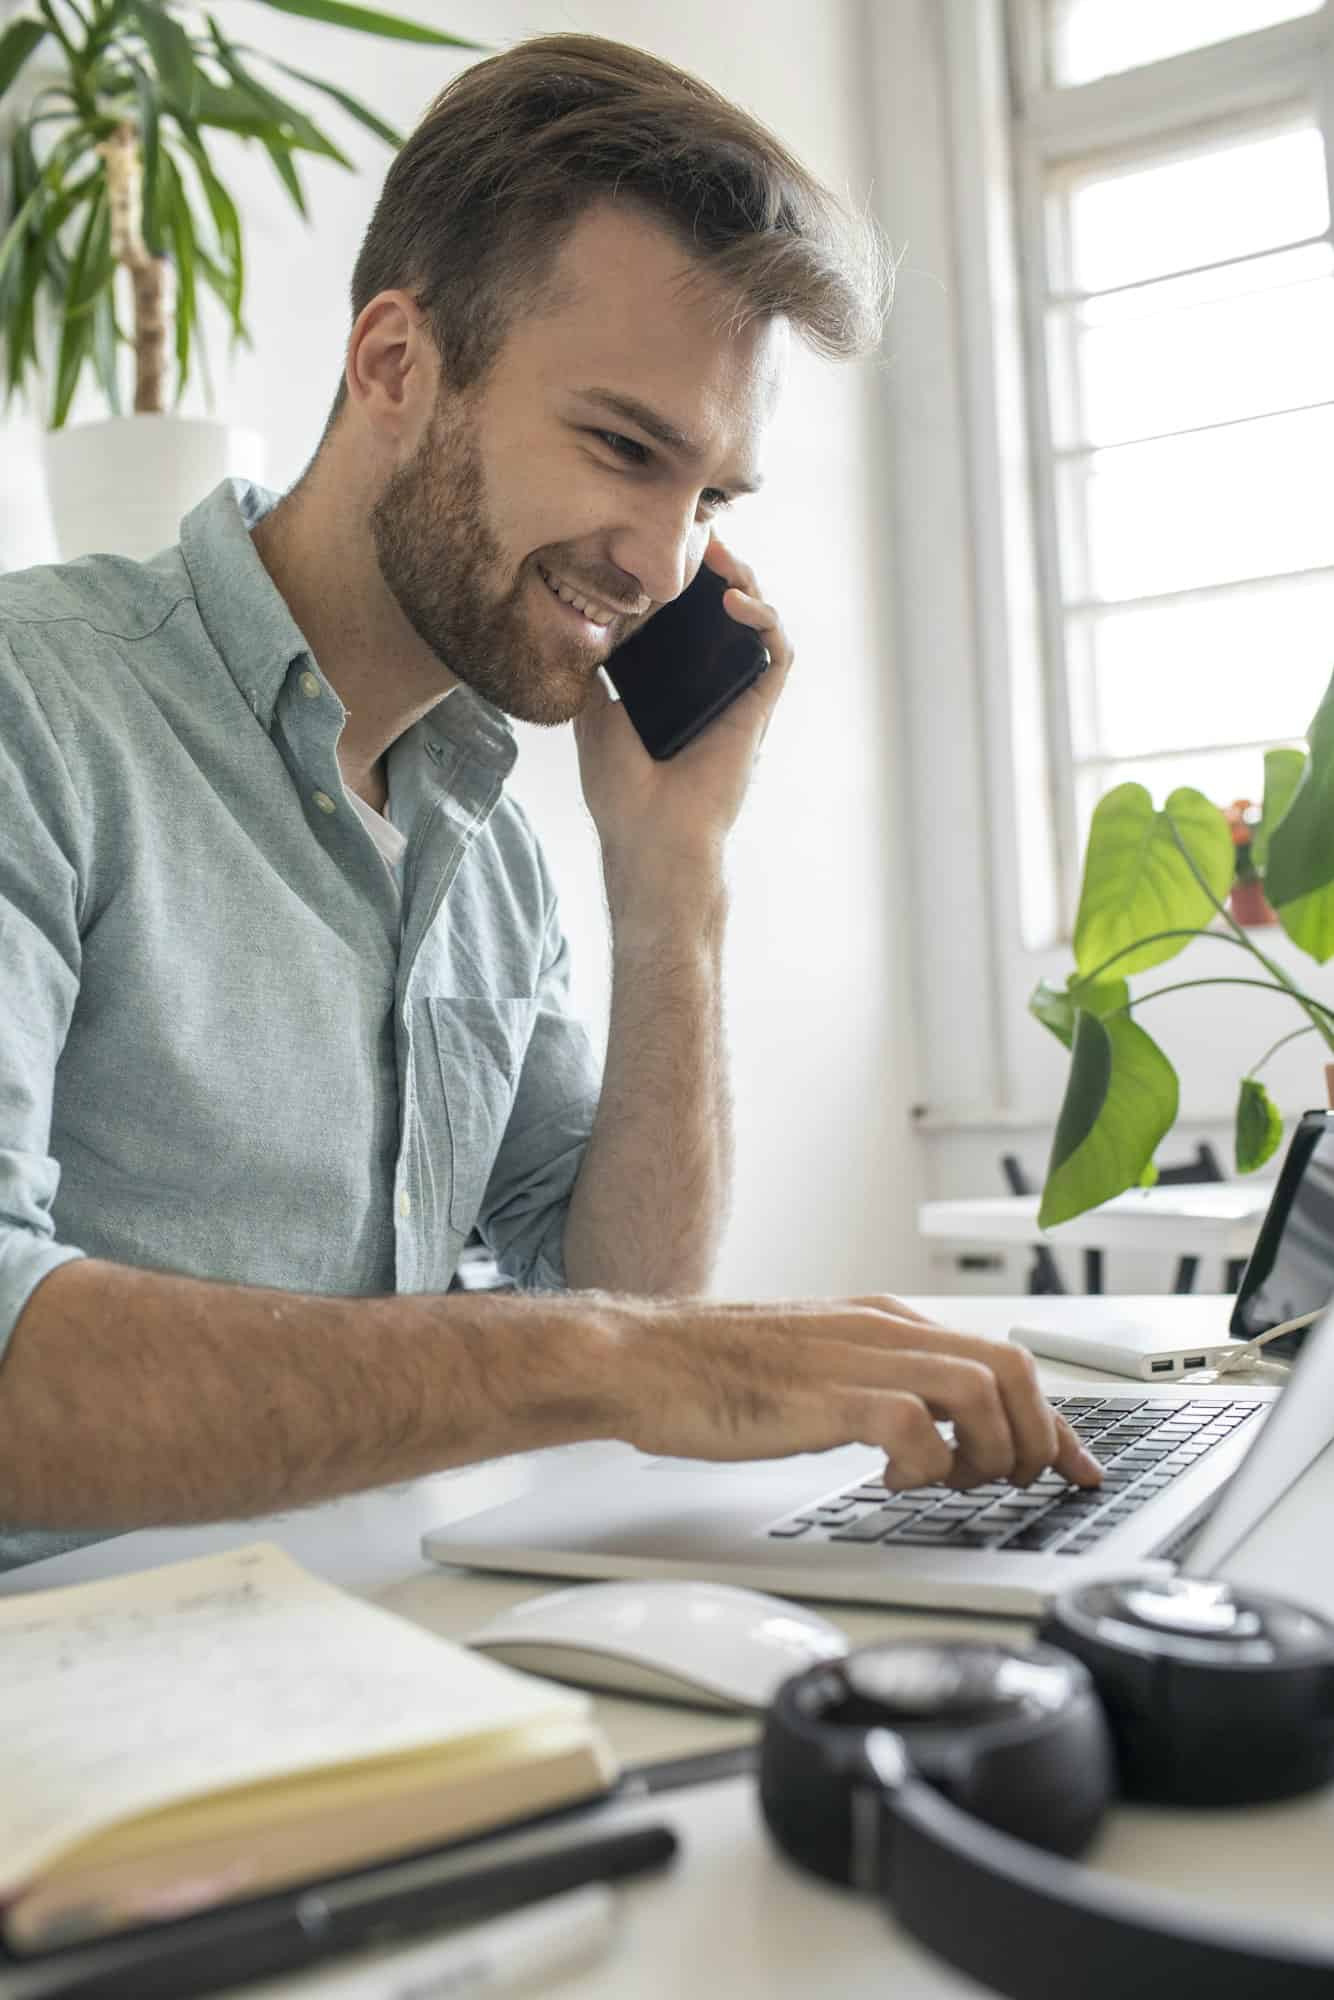 Smiling man on the phone at desk in office